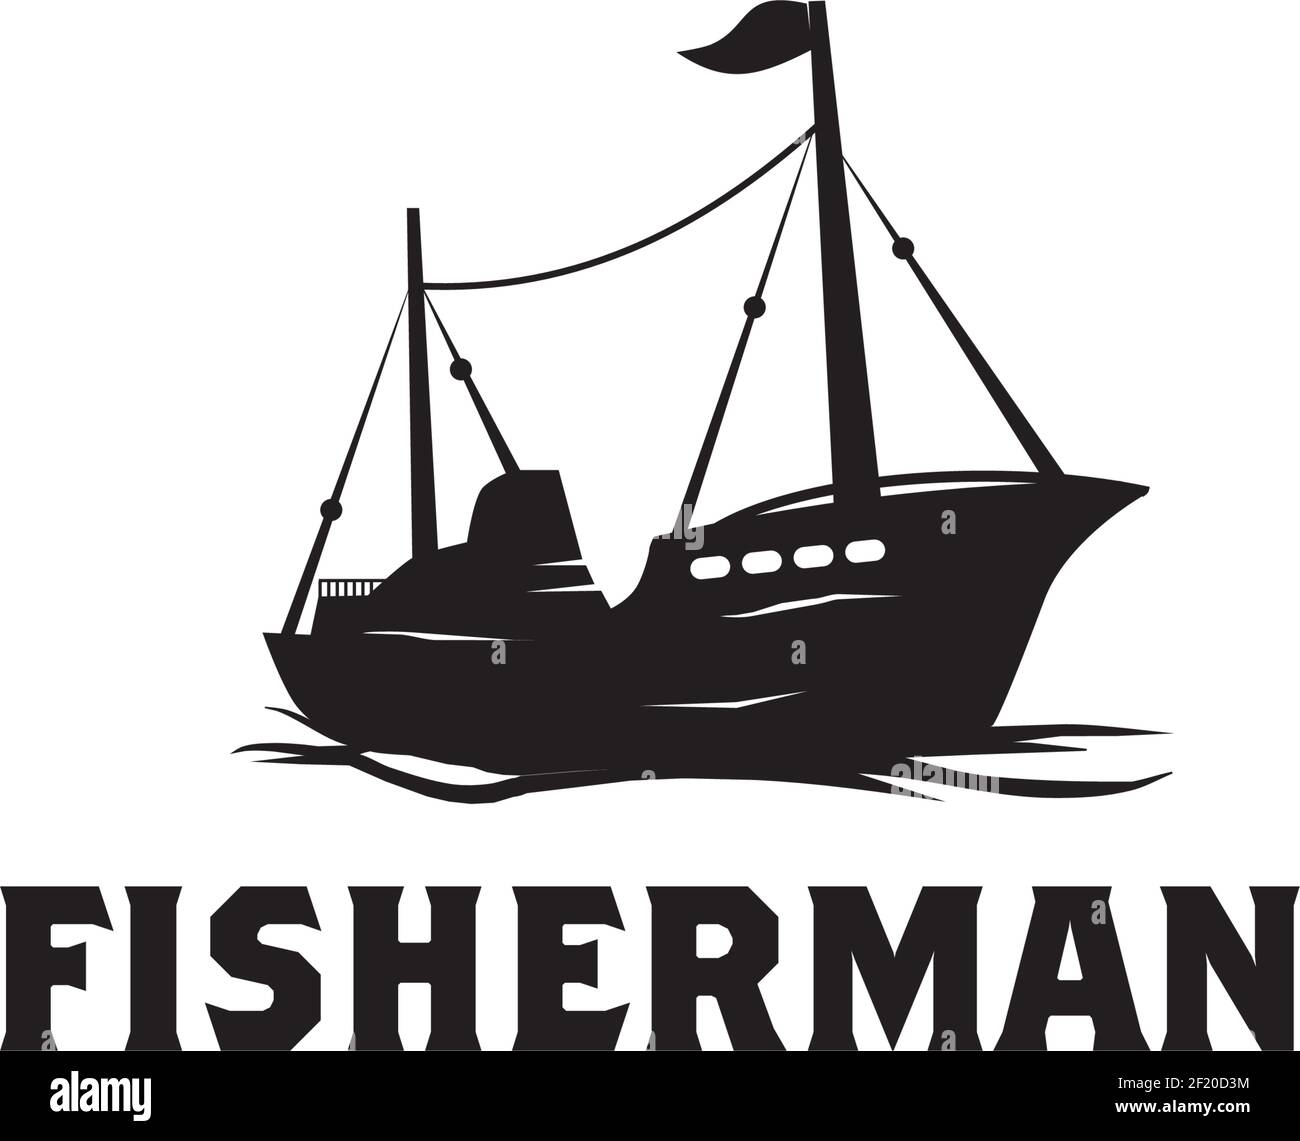 Fishing boat logo Cut Out Stock Images & Pictures - Alamy